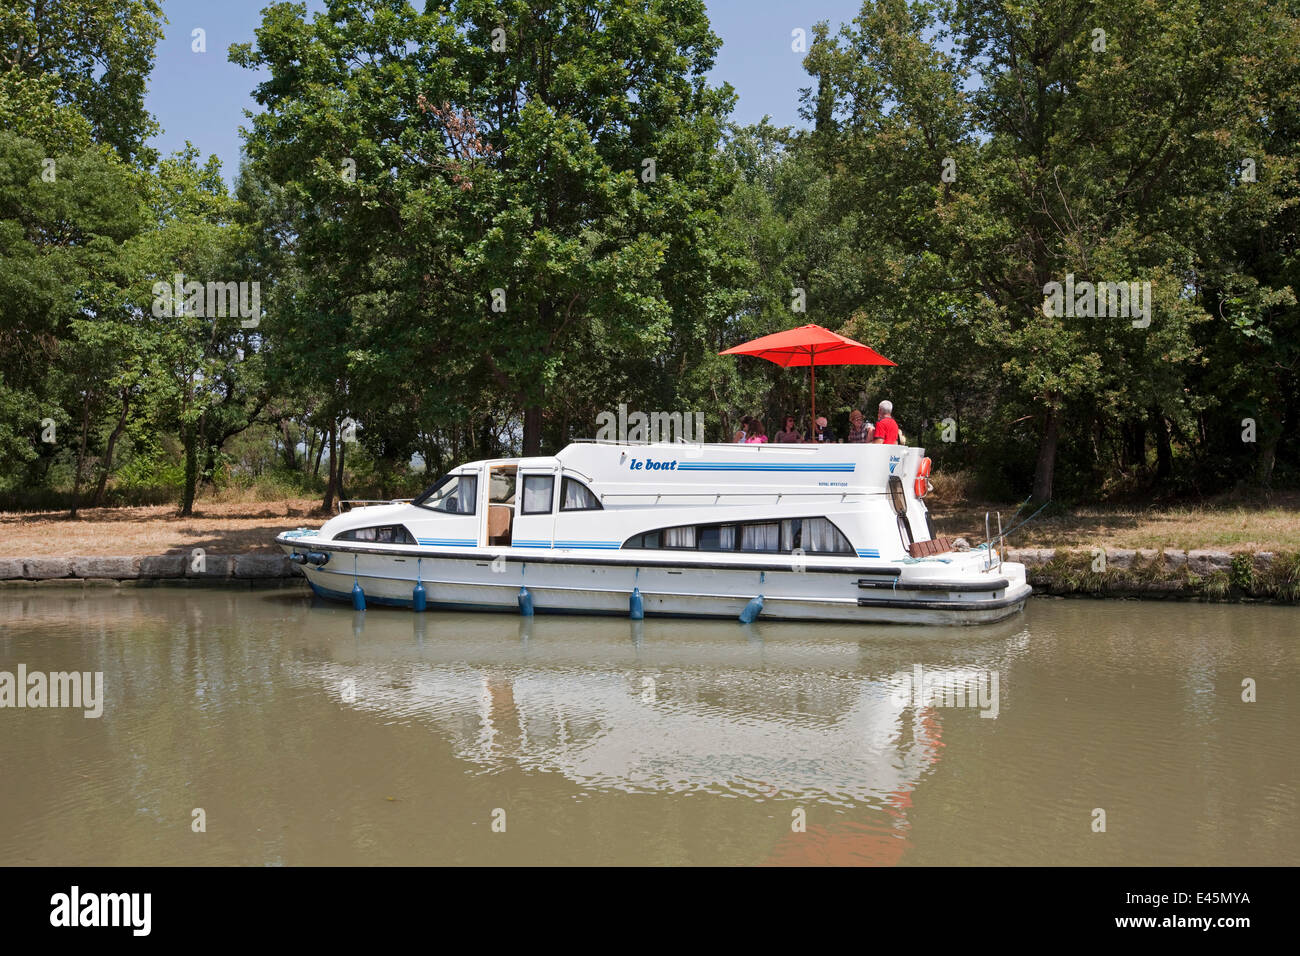 Family cruising on the Canal Du Midi near Pechlairier, southern France. July 2009. Model and property released. Stock Photo